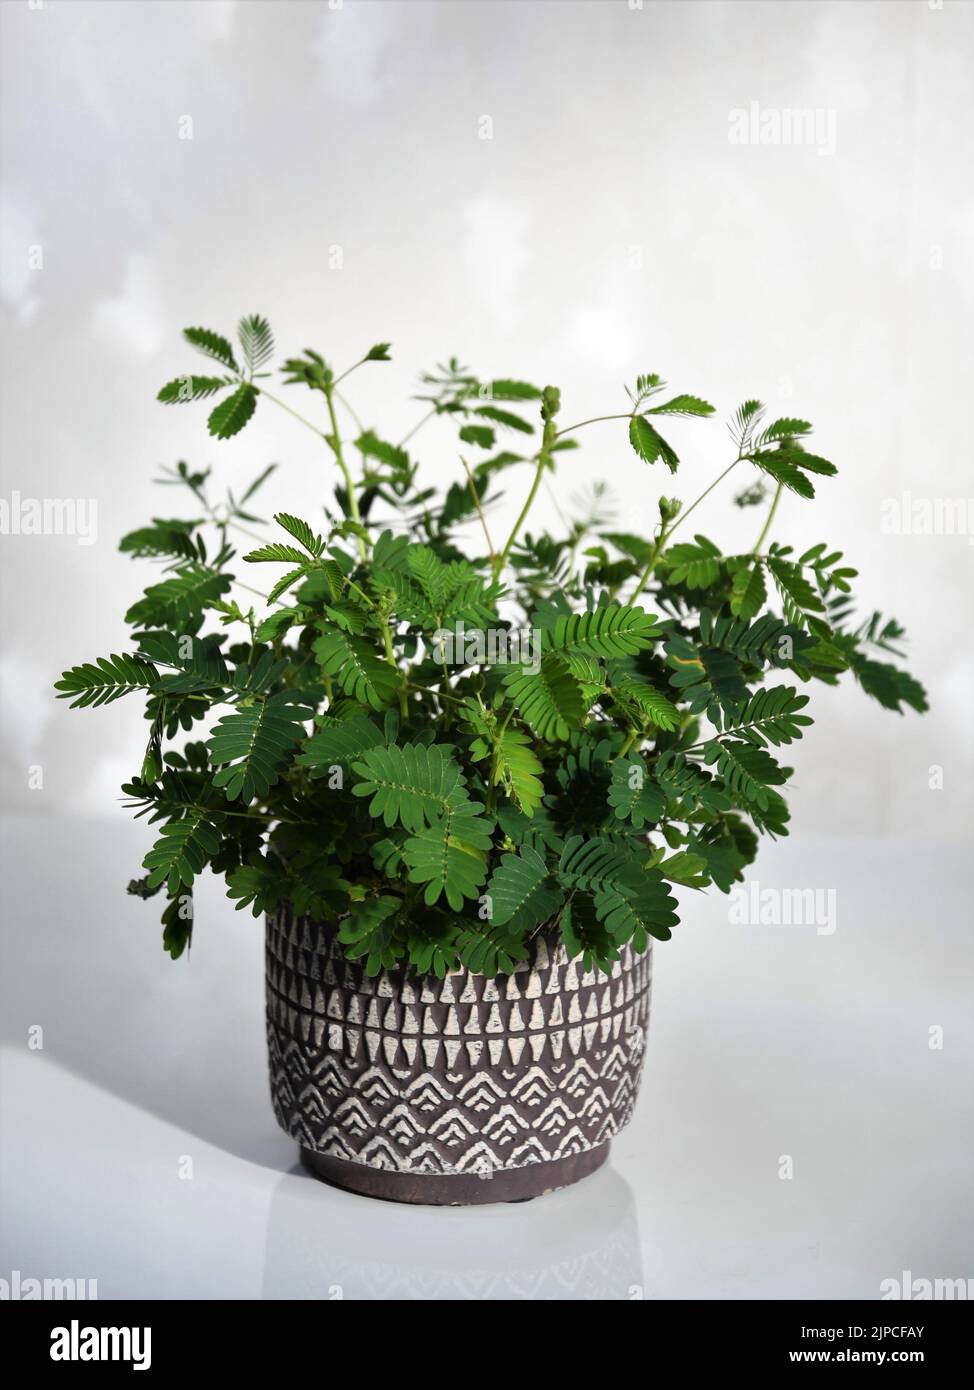 Mimosa pudica houseplant, also known as sensitive plant, sleepy plant, action plant, touch-me-not, and shameplant. Green plant in a purple pot. Stock Photo